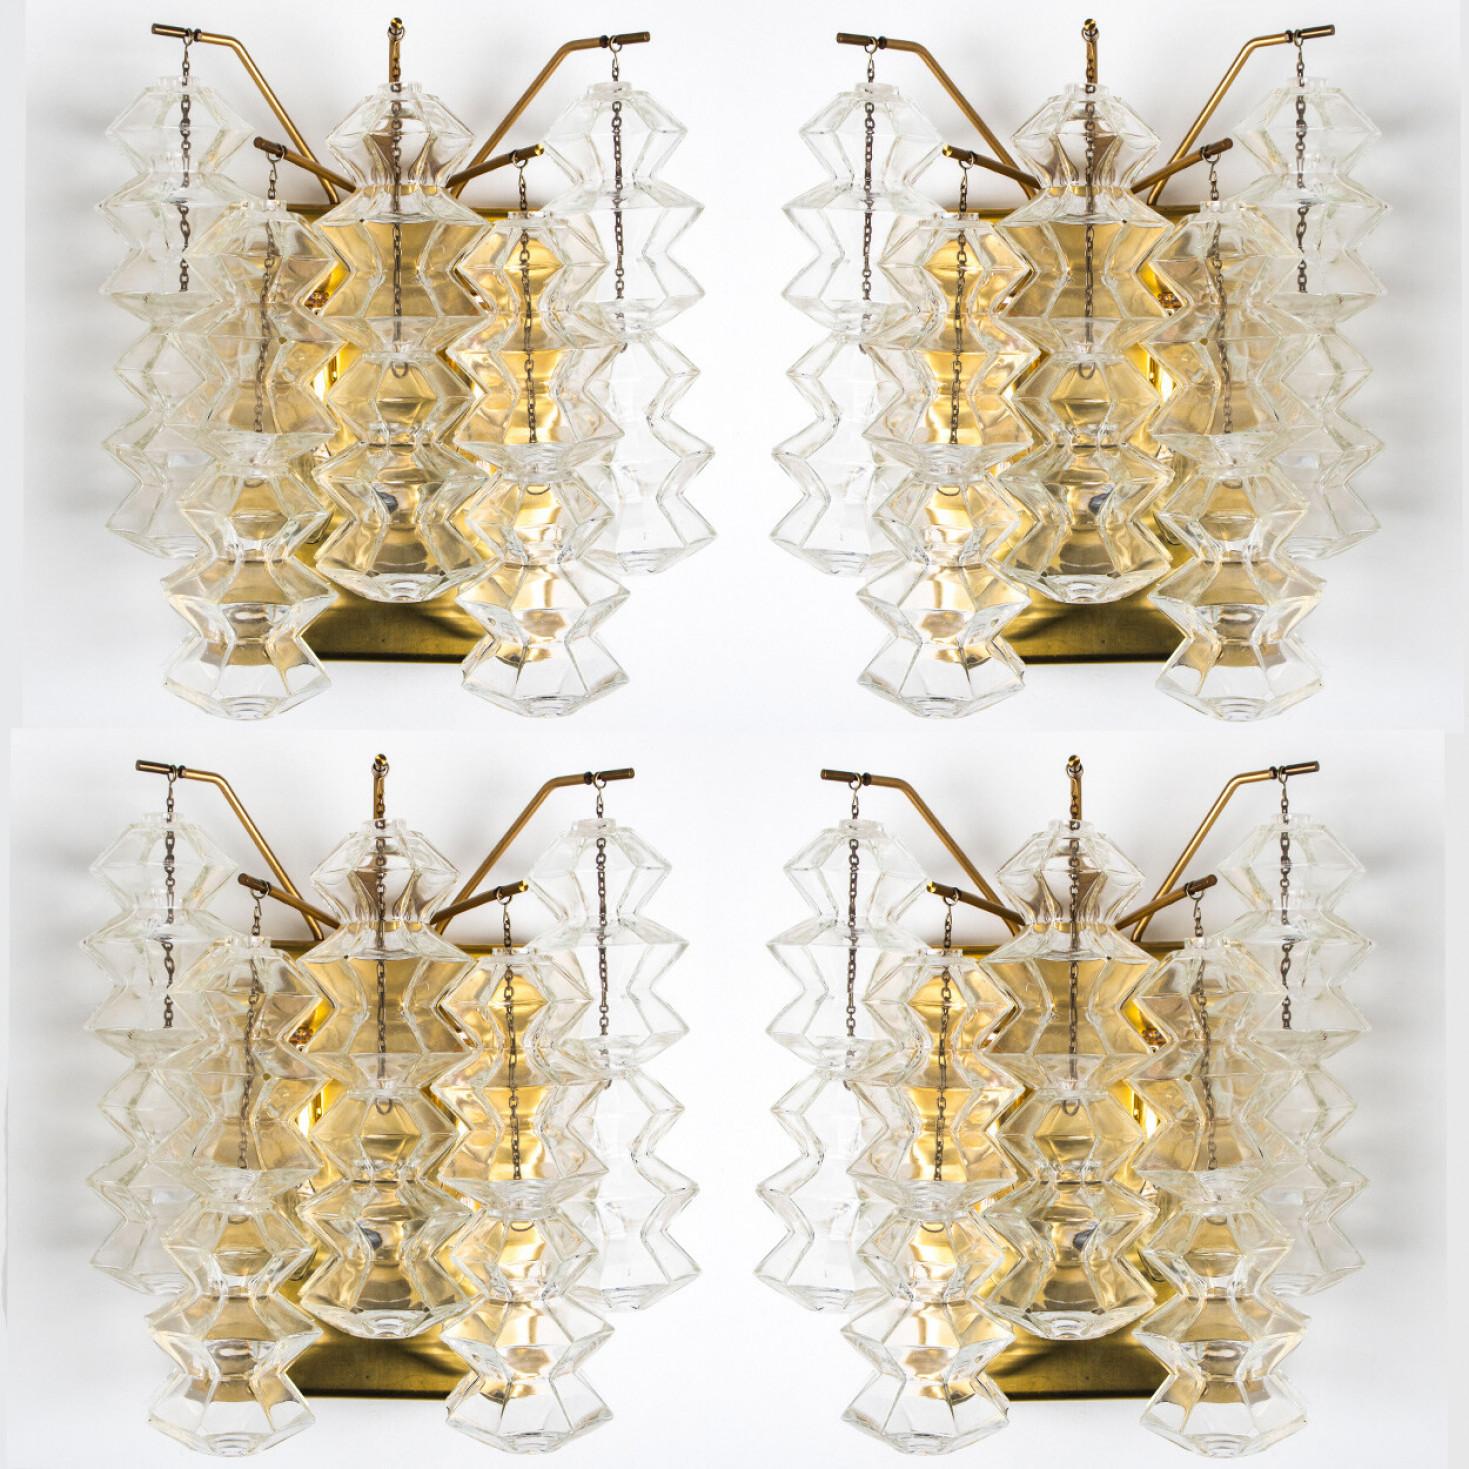 Mid-Century Modern 1 of the 3 Pairs of Pagoda Brass and Glass Sconces Wall Lights by Kalmar, Vienna For Sale